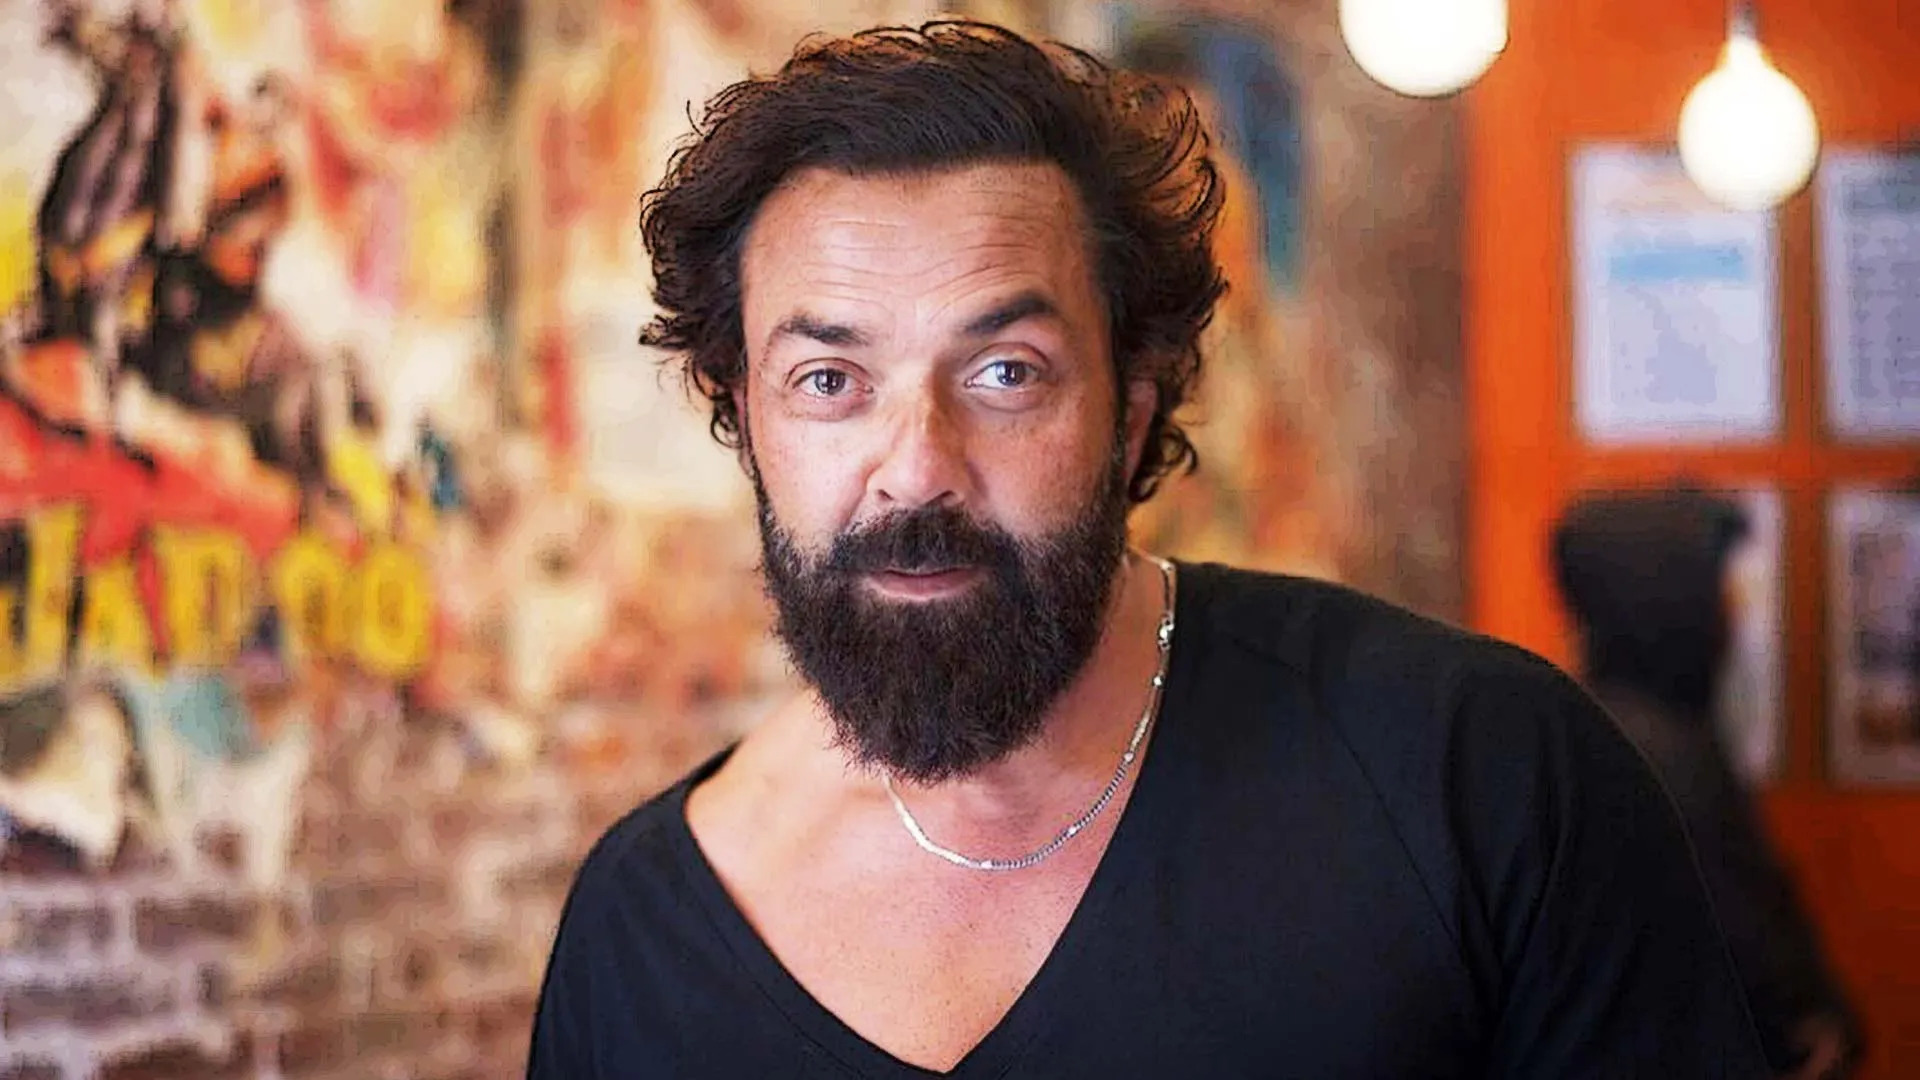 Kanguva-to-Aashram-Season-4-5-upcoming-movies-and-web-series-starring-Bobby-Deol-to-look-forward-to-after-Animal.